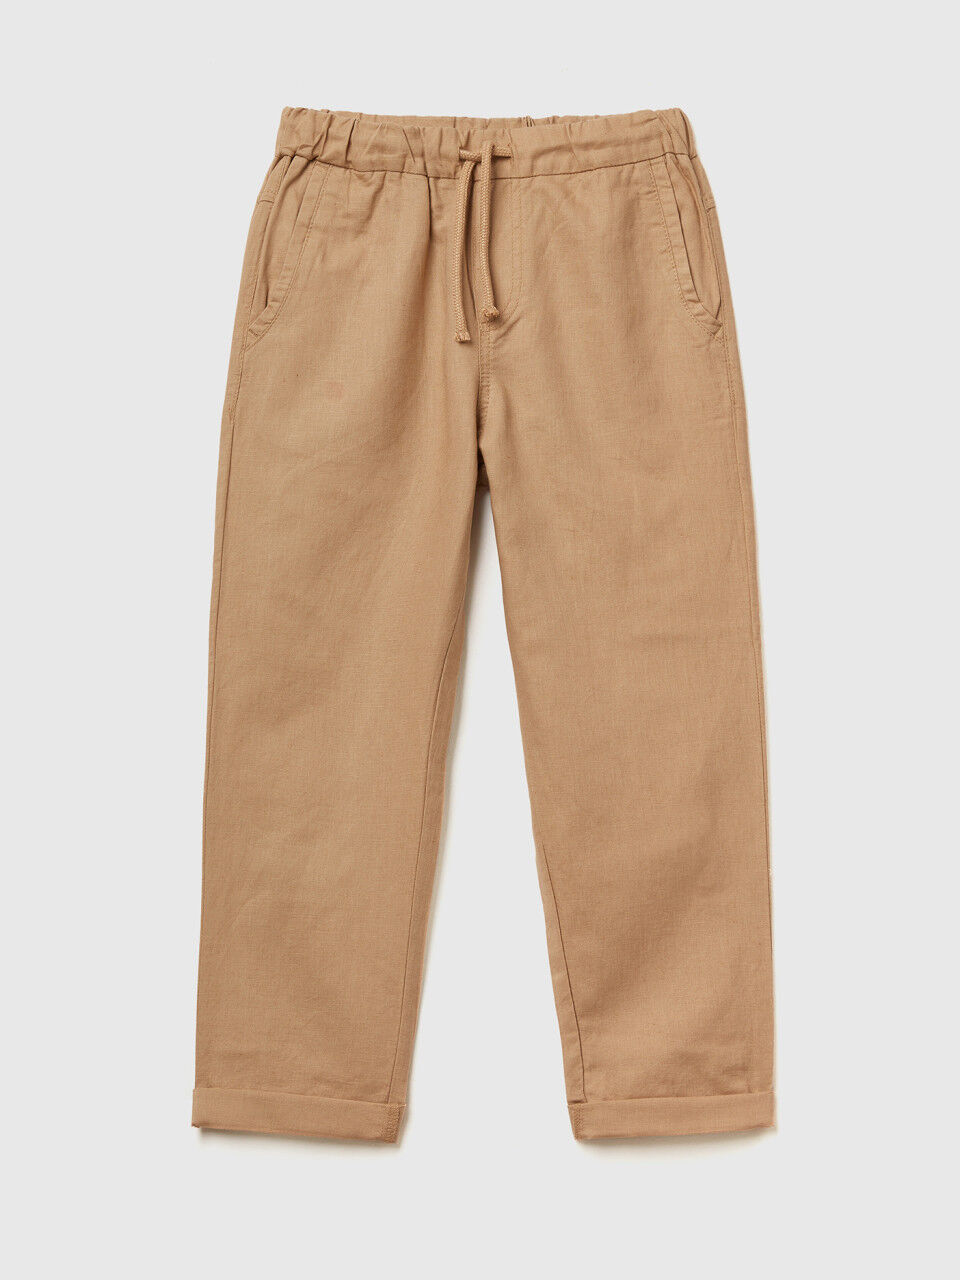 Slim fit trousers in linen blend